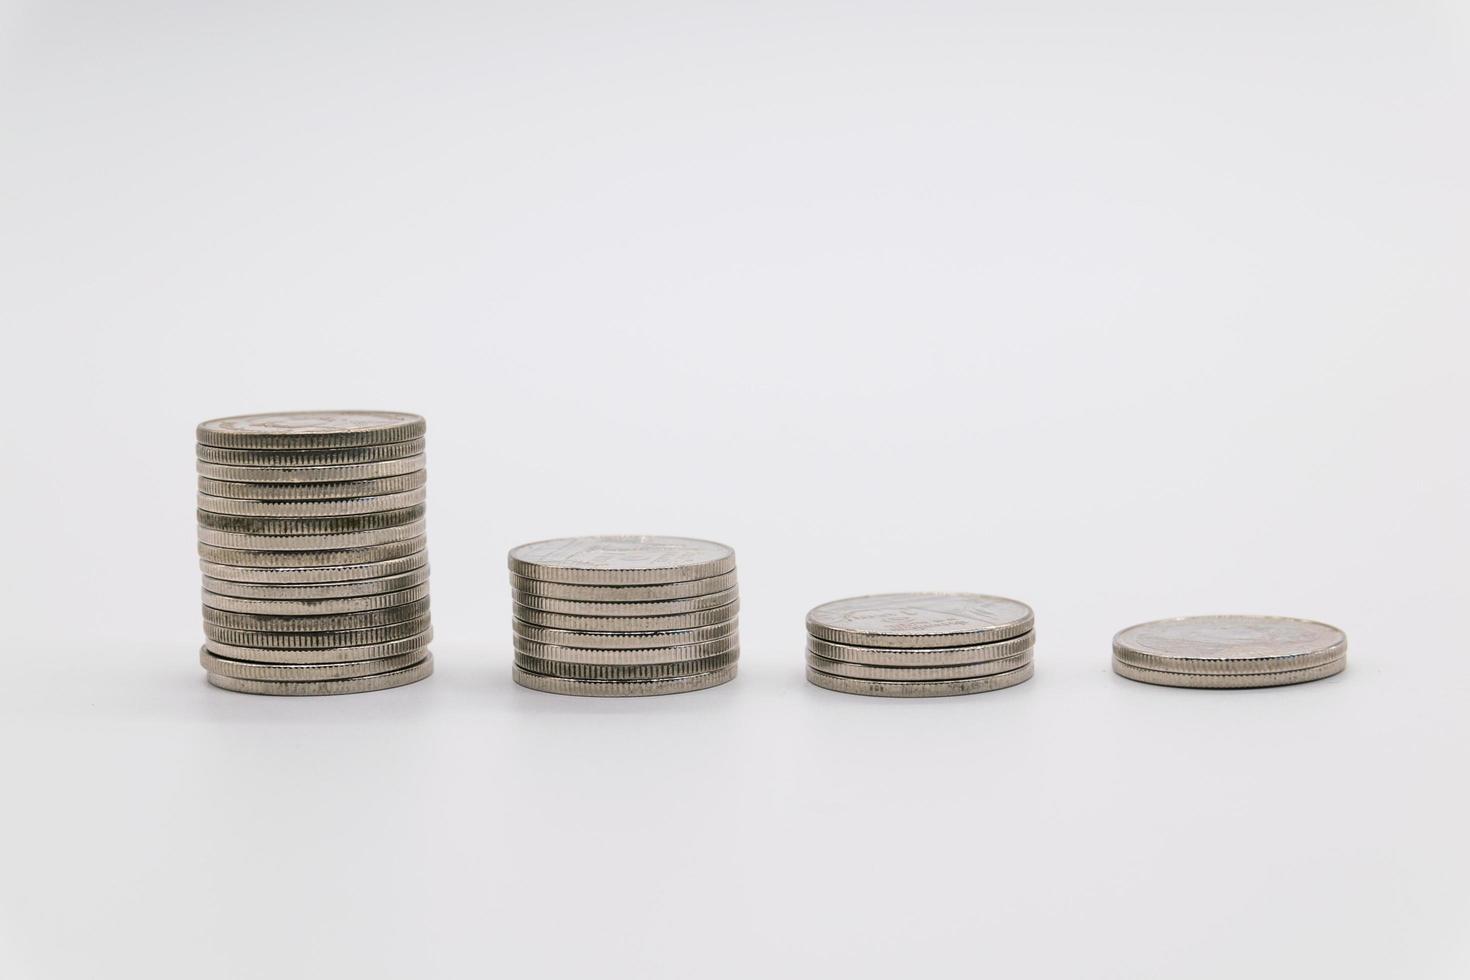 coins stacked on white background photo